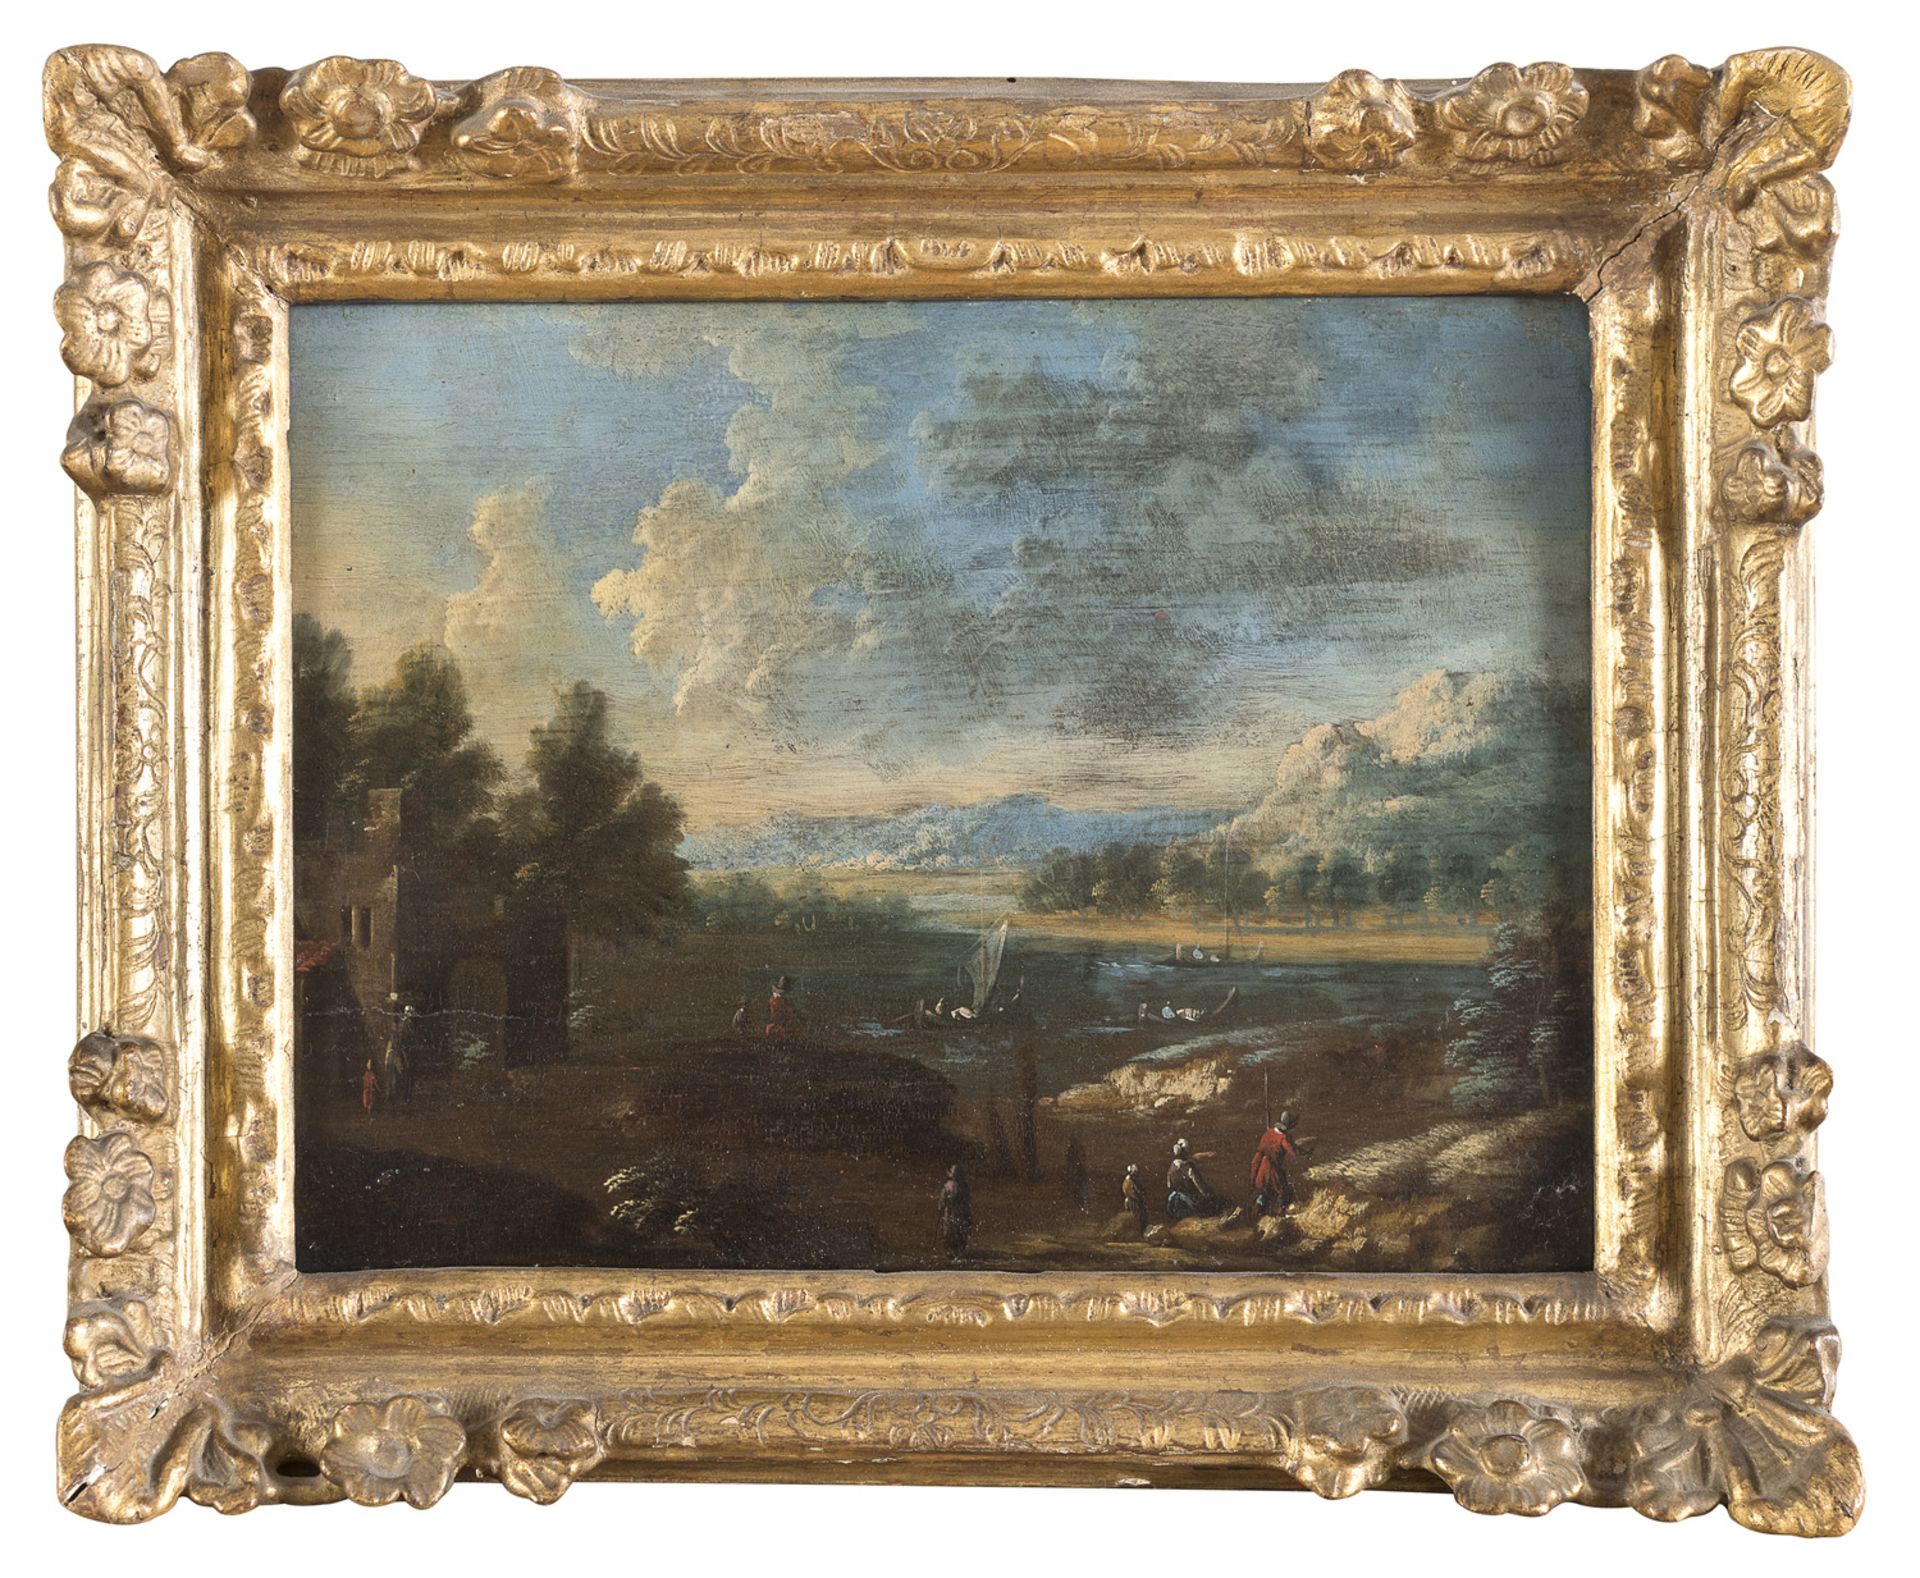 DUTCH OIL PAINTING OF A LANDSCAPE LATE 17TH CENTURY